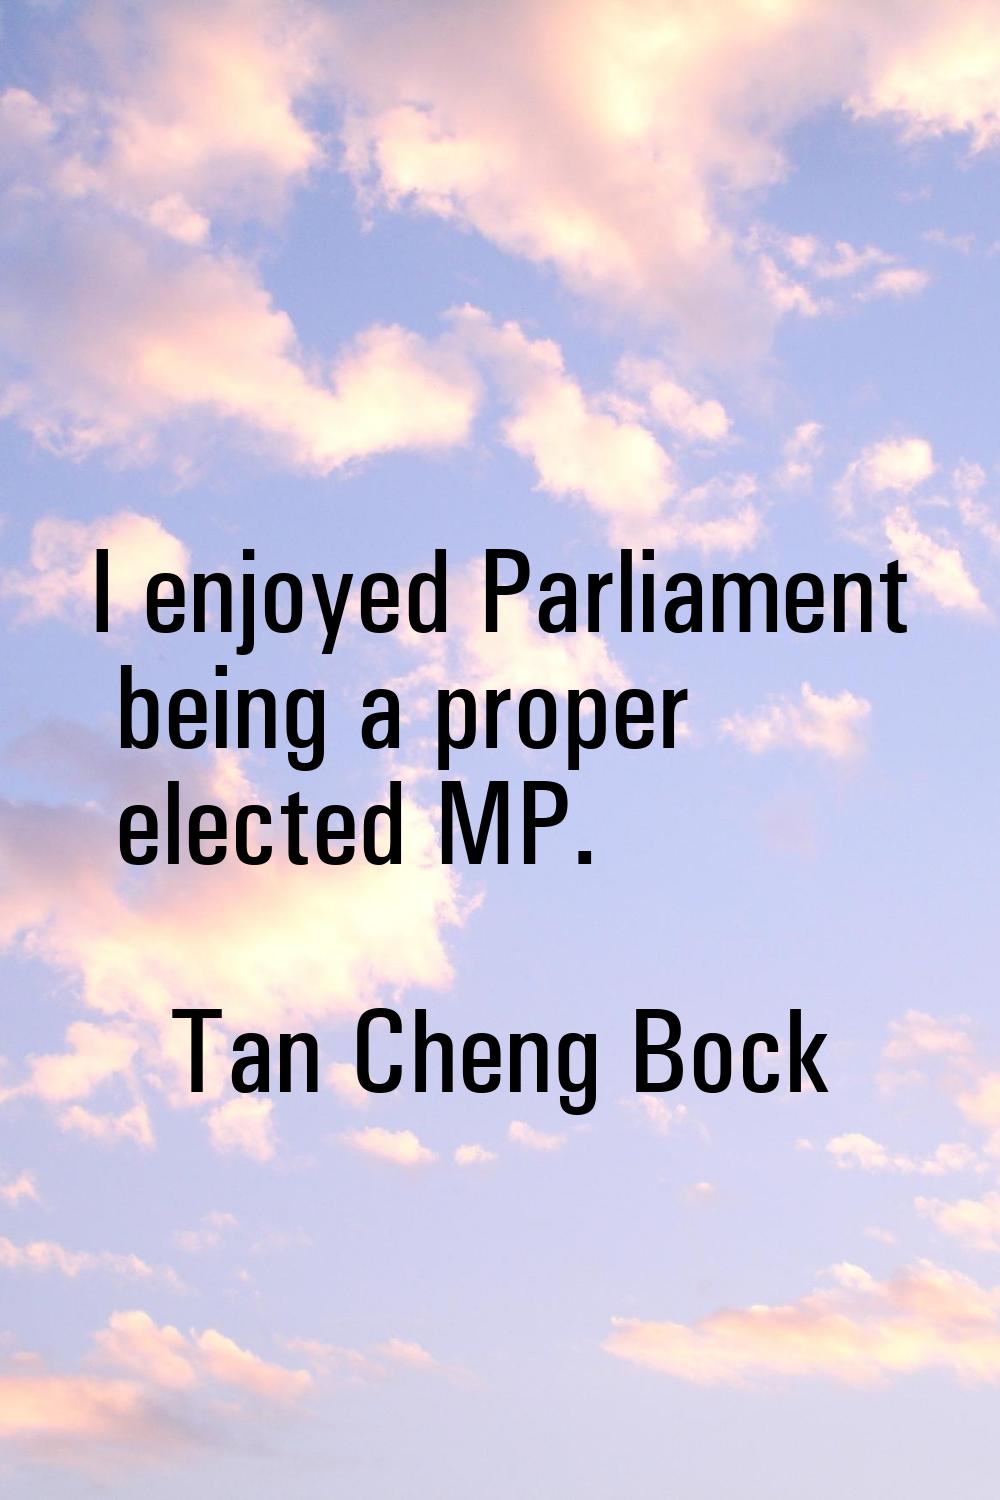 I enjoyed Parliament being a proper elected MP.